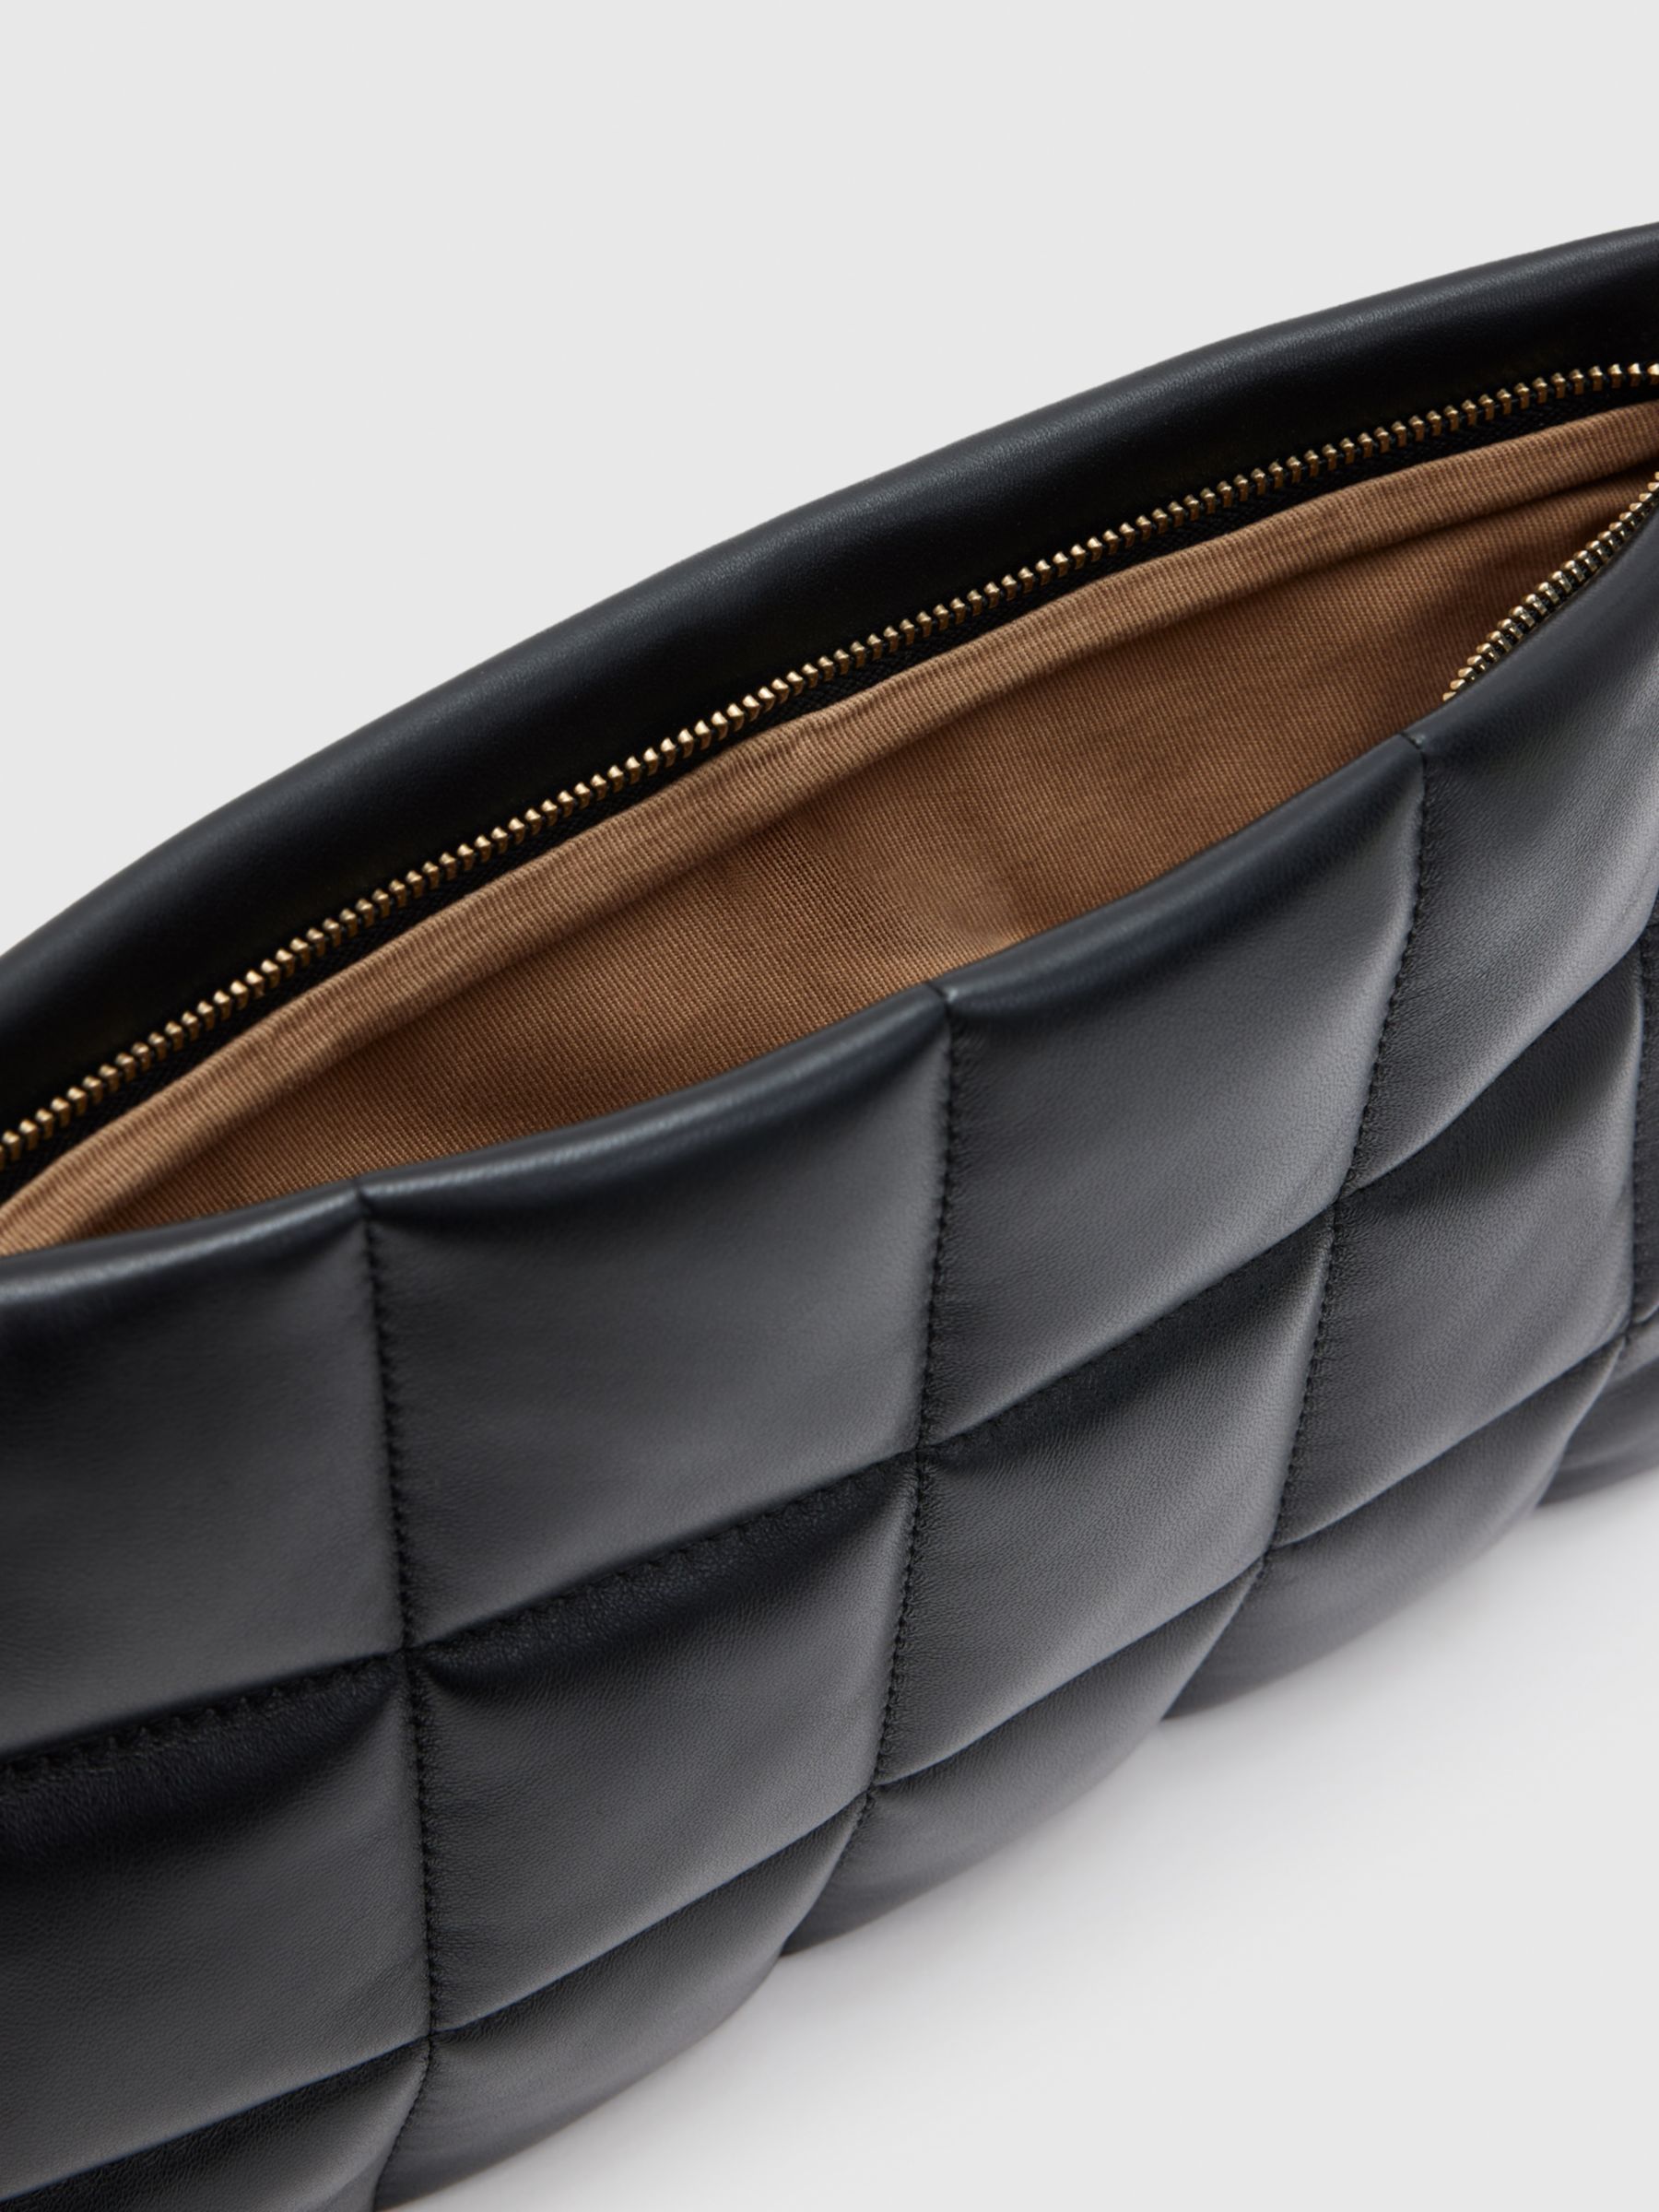 AllSaints Bettina Quilted Leather Clutch Bag, Black at John Lewis ...